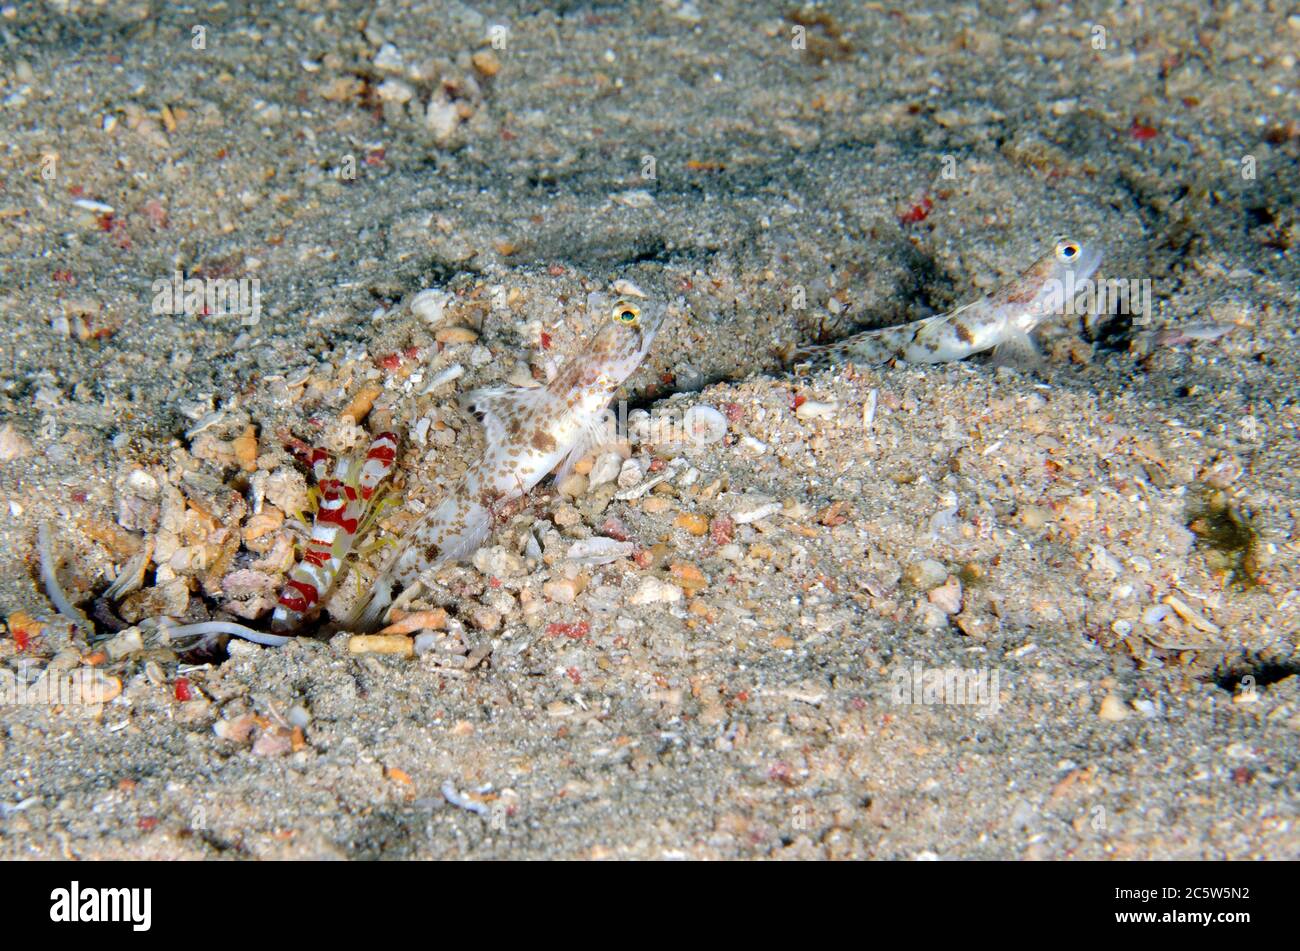 Pair of Monster Shrimpgobies, Tomiyamichthys oni, with Randall's Snapping Shrimp, Alpheus randalli, cleaning hole, Yellow Coco dive site, Bangka Islan Stock Photo